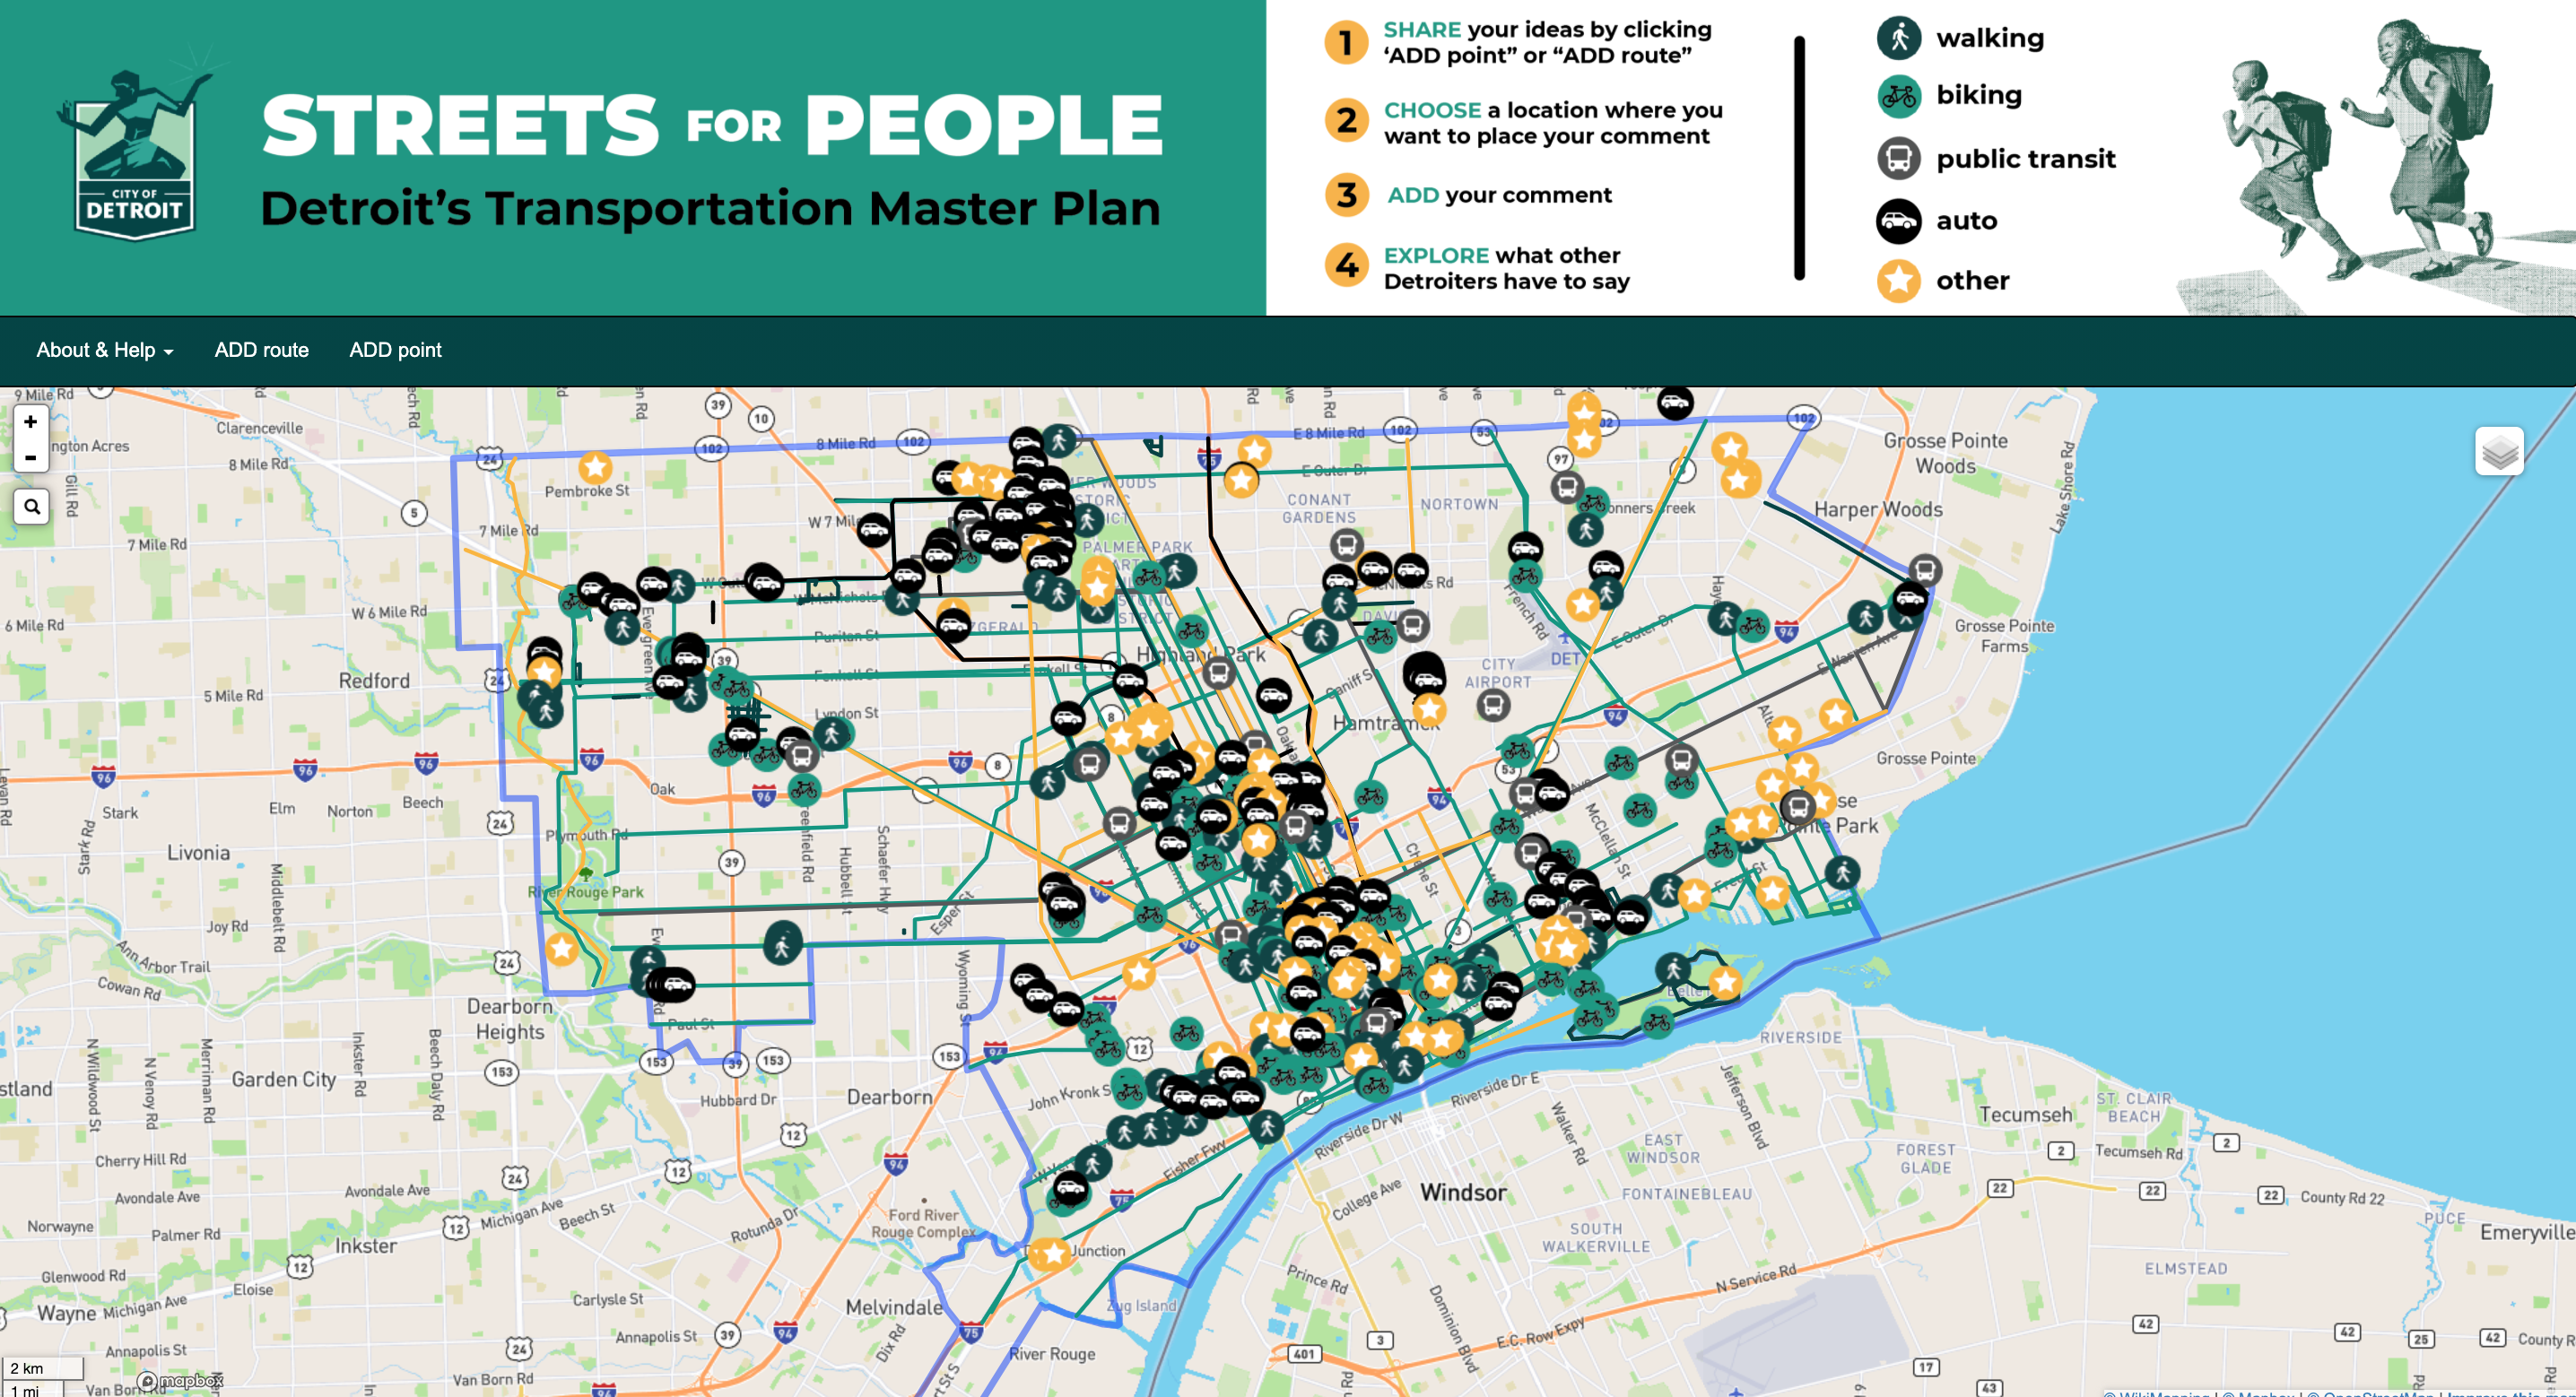 Streets for people online engagement map